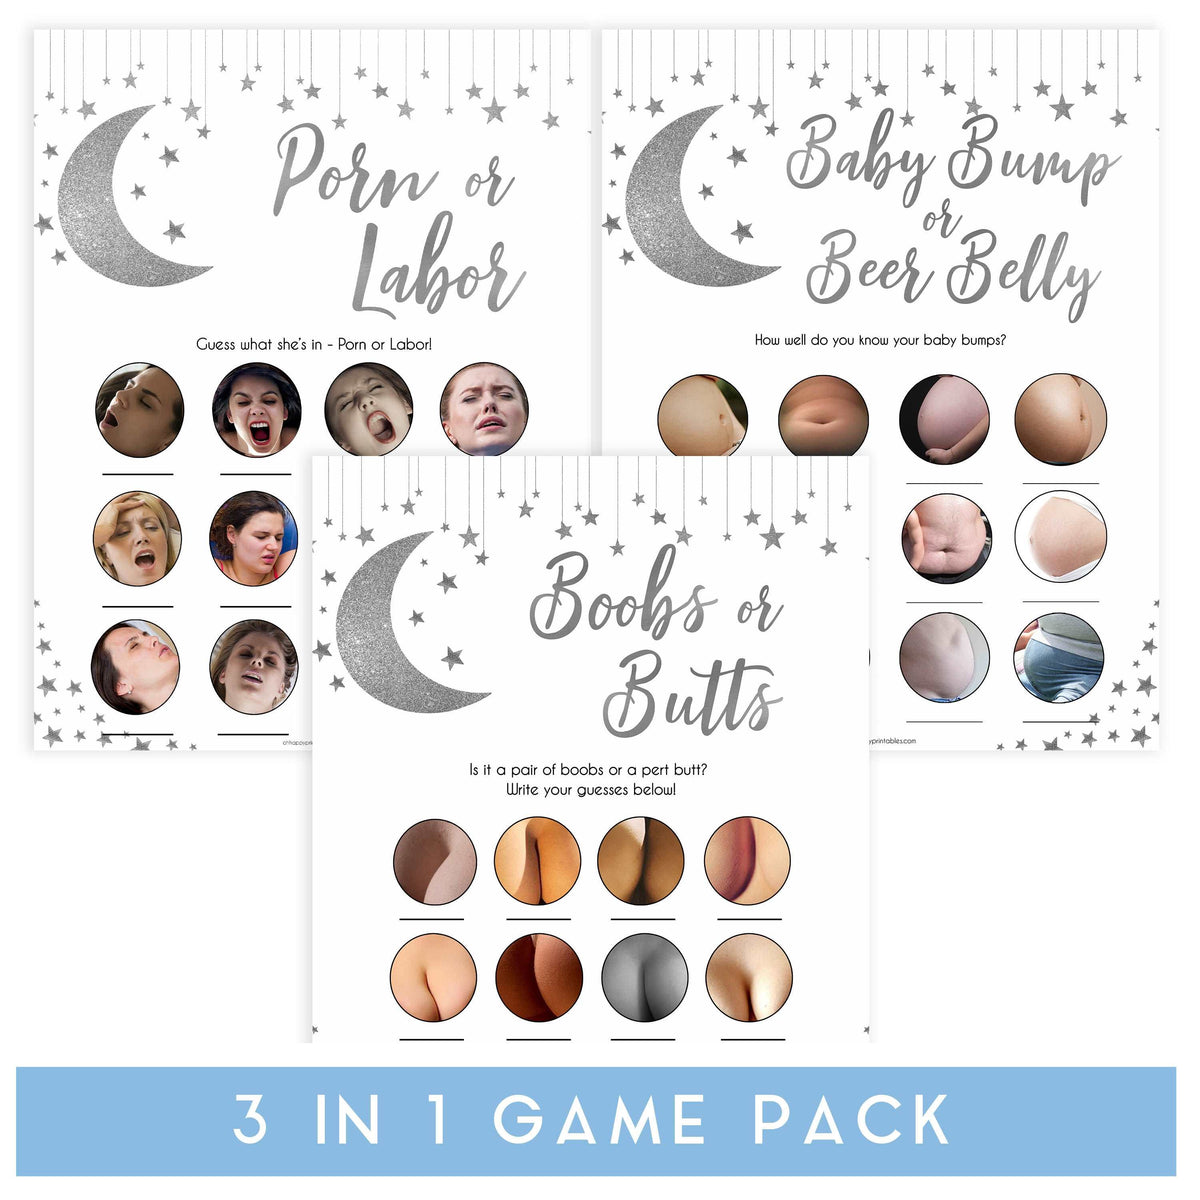 labor or porn game, baby bump or beer belly game, boobs or butts game,Little star baby shower games, printable baby shower games, twinkle star baby shower, fun baby games, top baby shower ideas